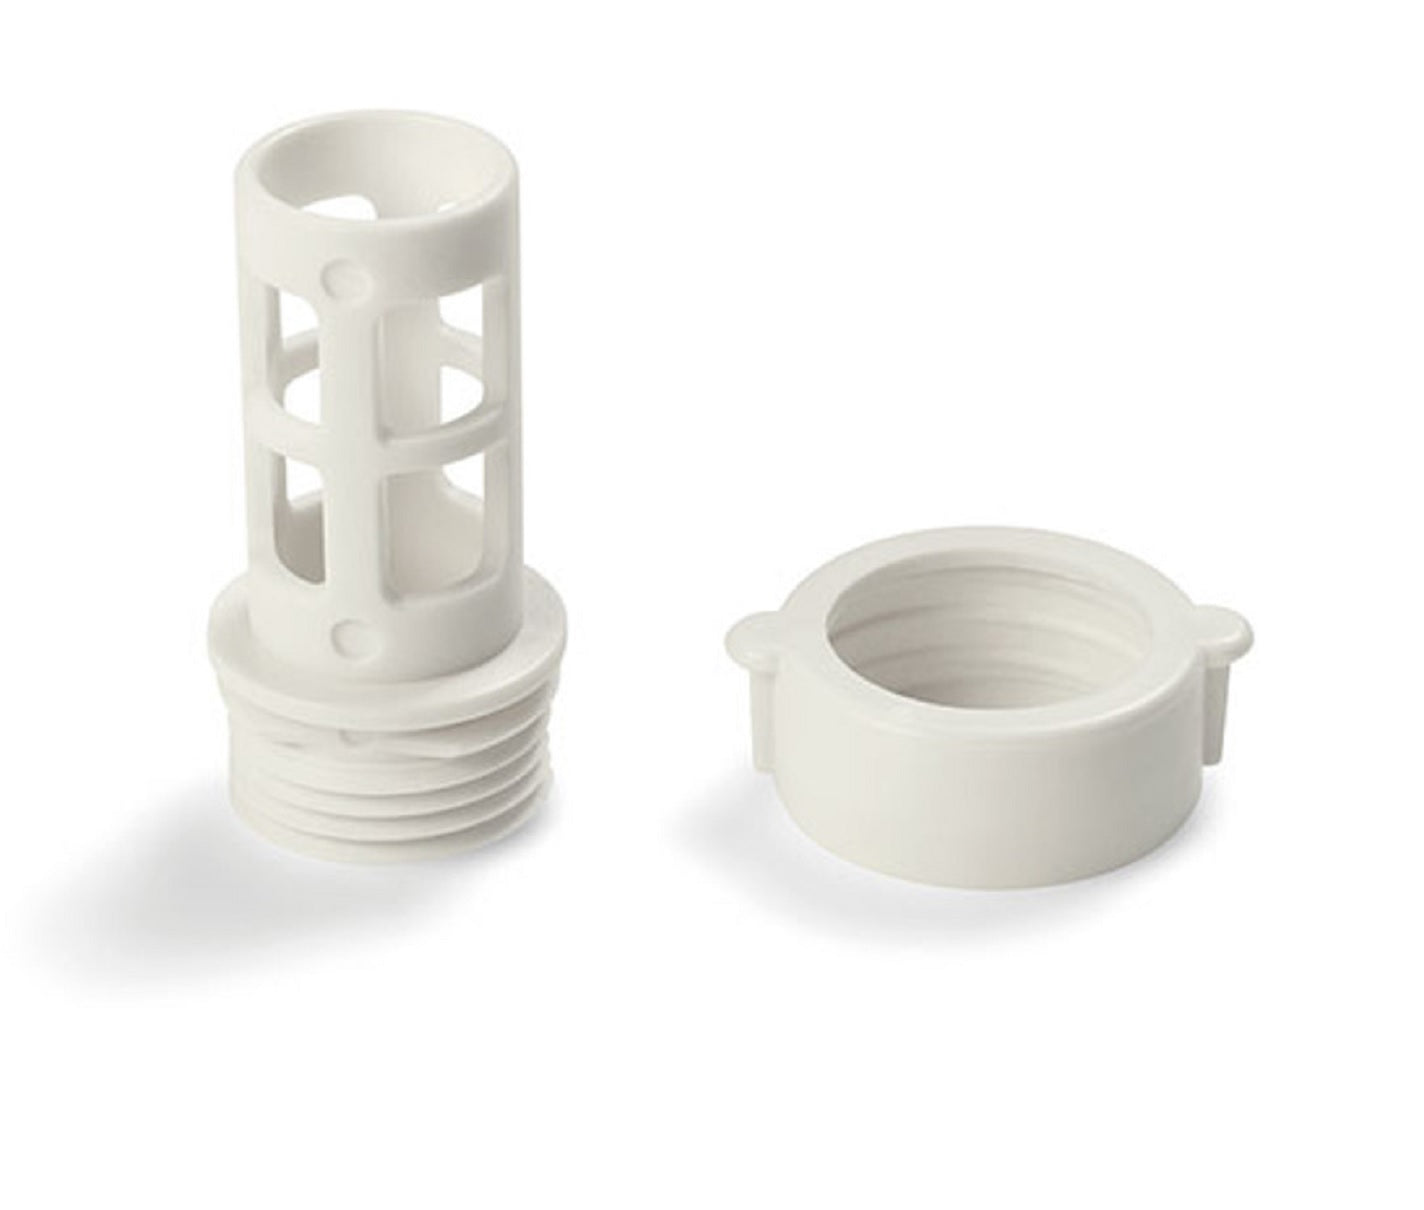 Intex Garden Hose Drain Plug Connector for Above Ground Pools